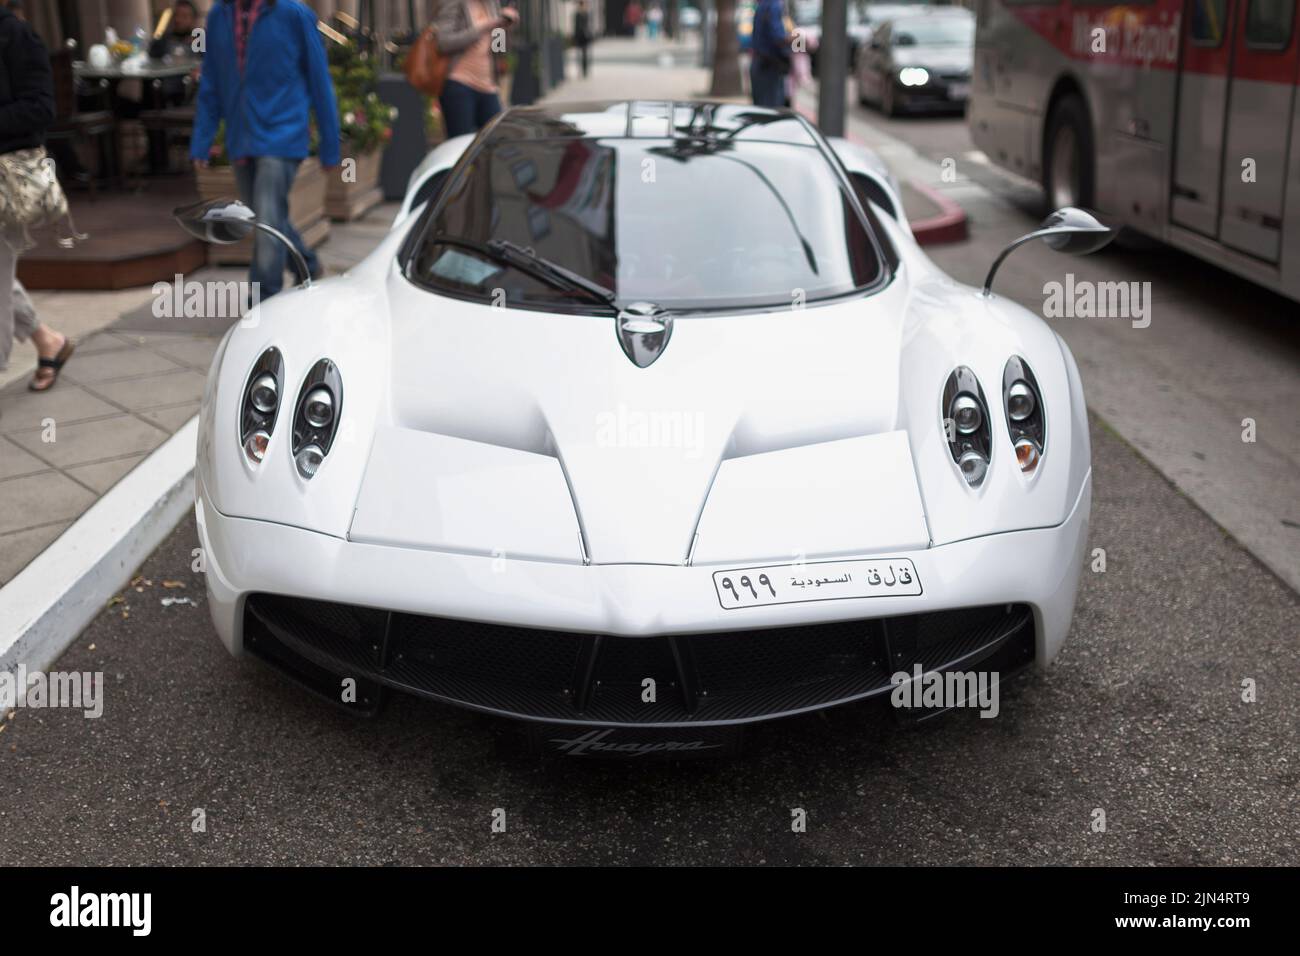 A rare Pagani Huayra 999 badged supercar parked in front of the Beverly Wilshire Four Seasons Hotel at the end of Rodeo Drive, Beverly Hills, USA Stock Photo